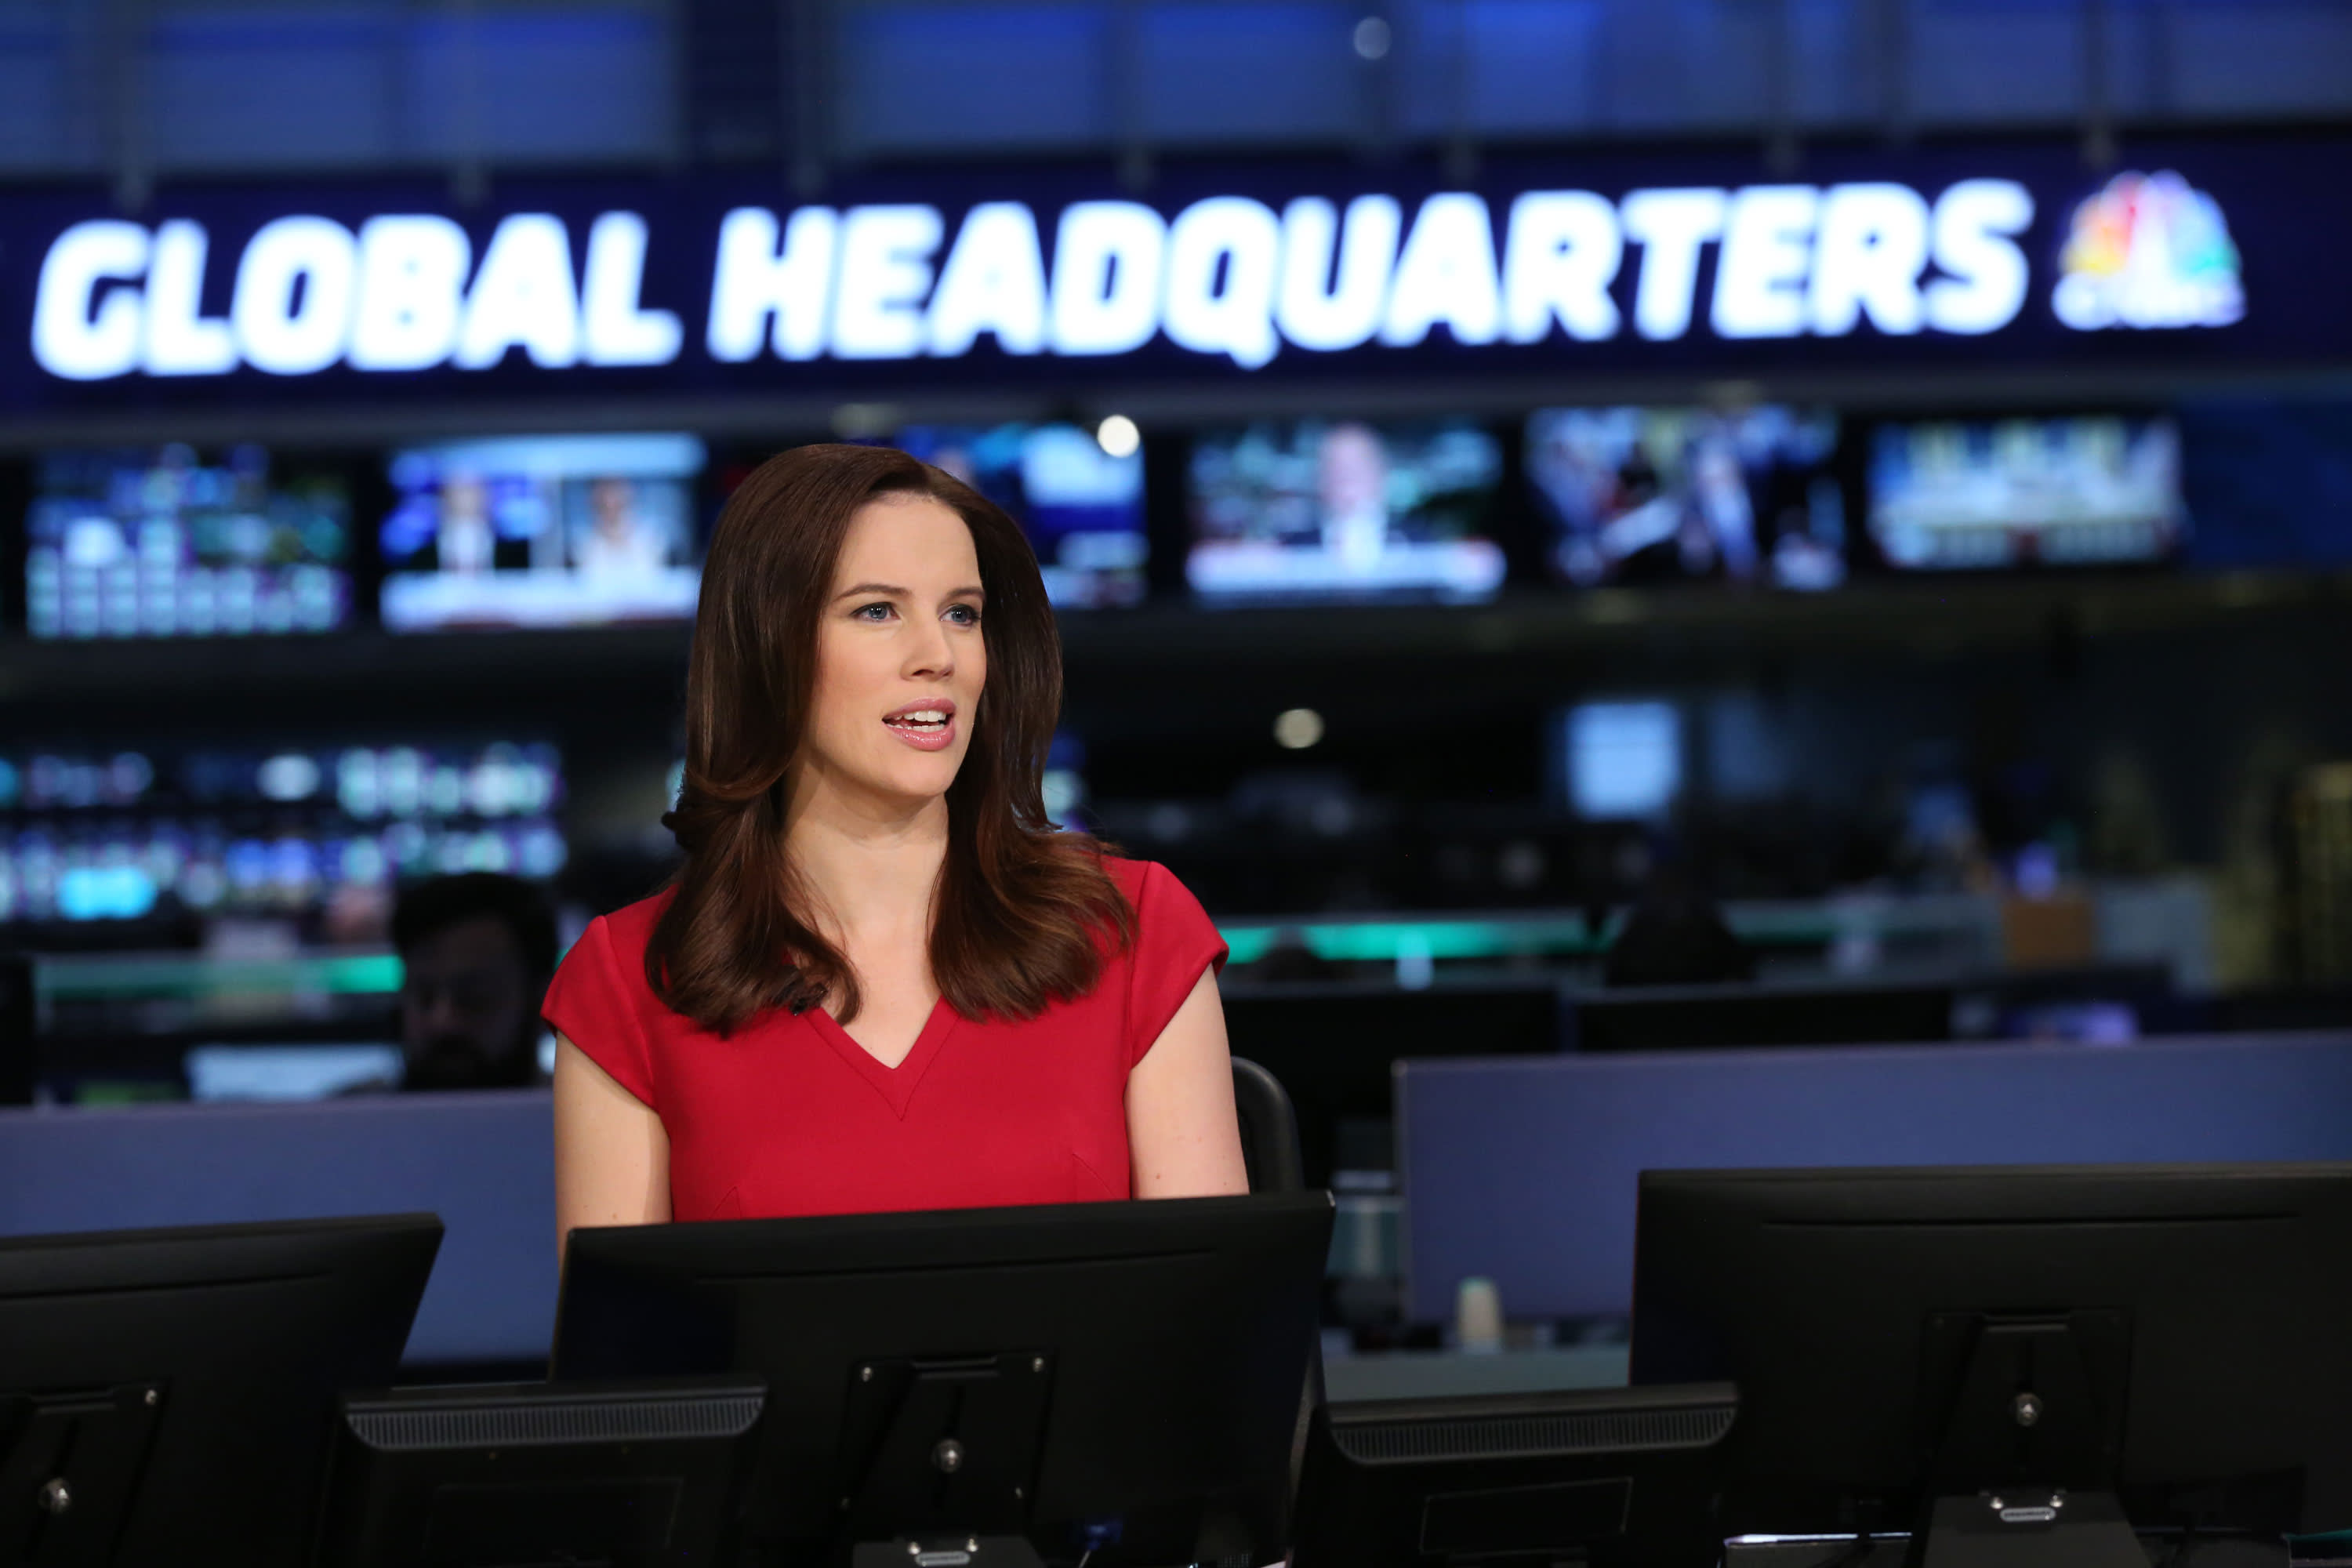 Kelly Evans: Let's talk about the debate...